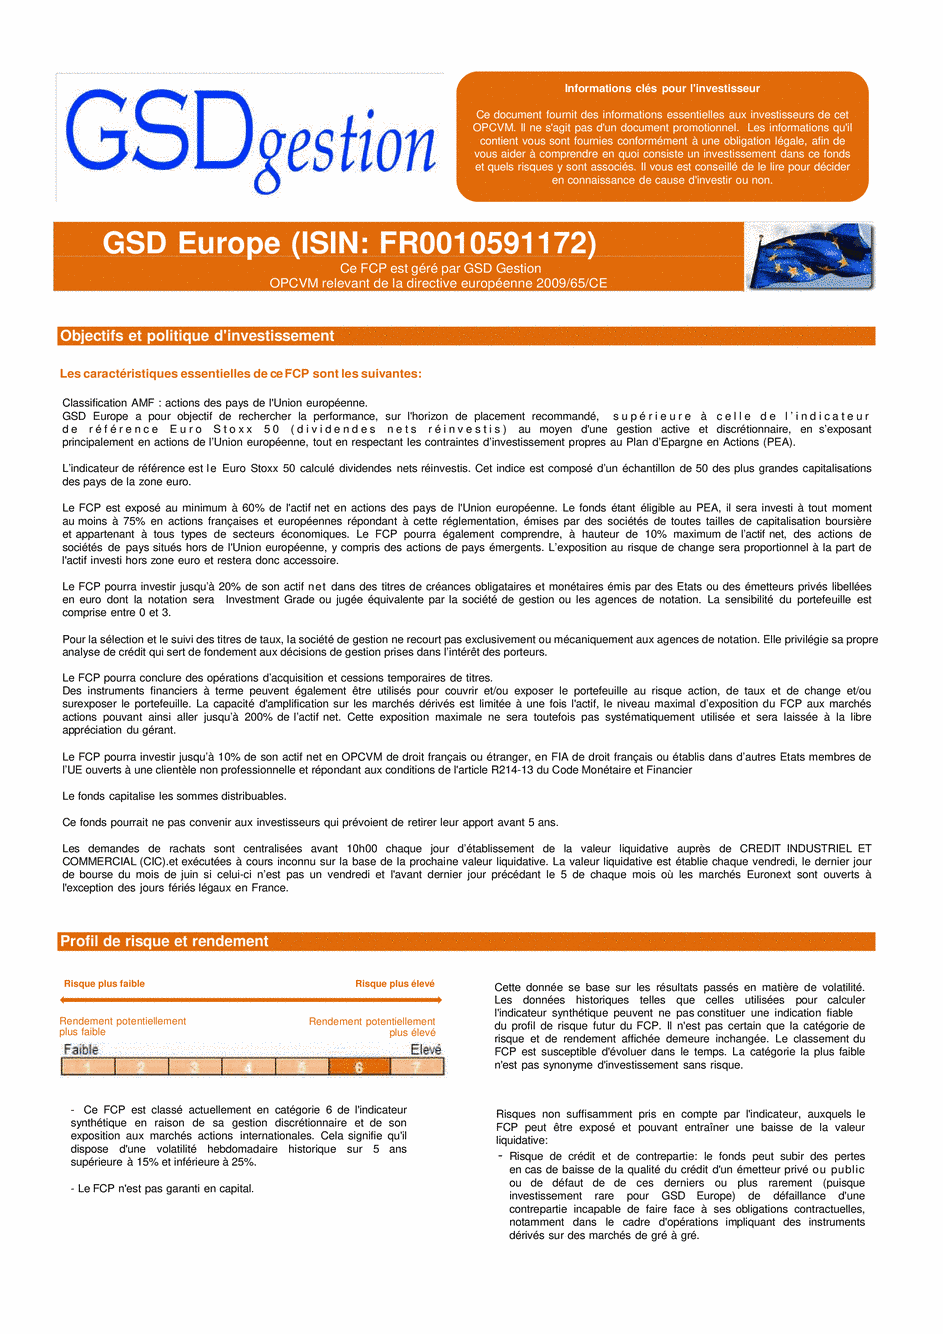 DICI-Prospectus Complet GSD Europe - 01/04/2019 - French